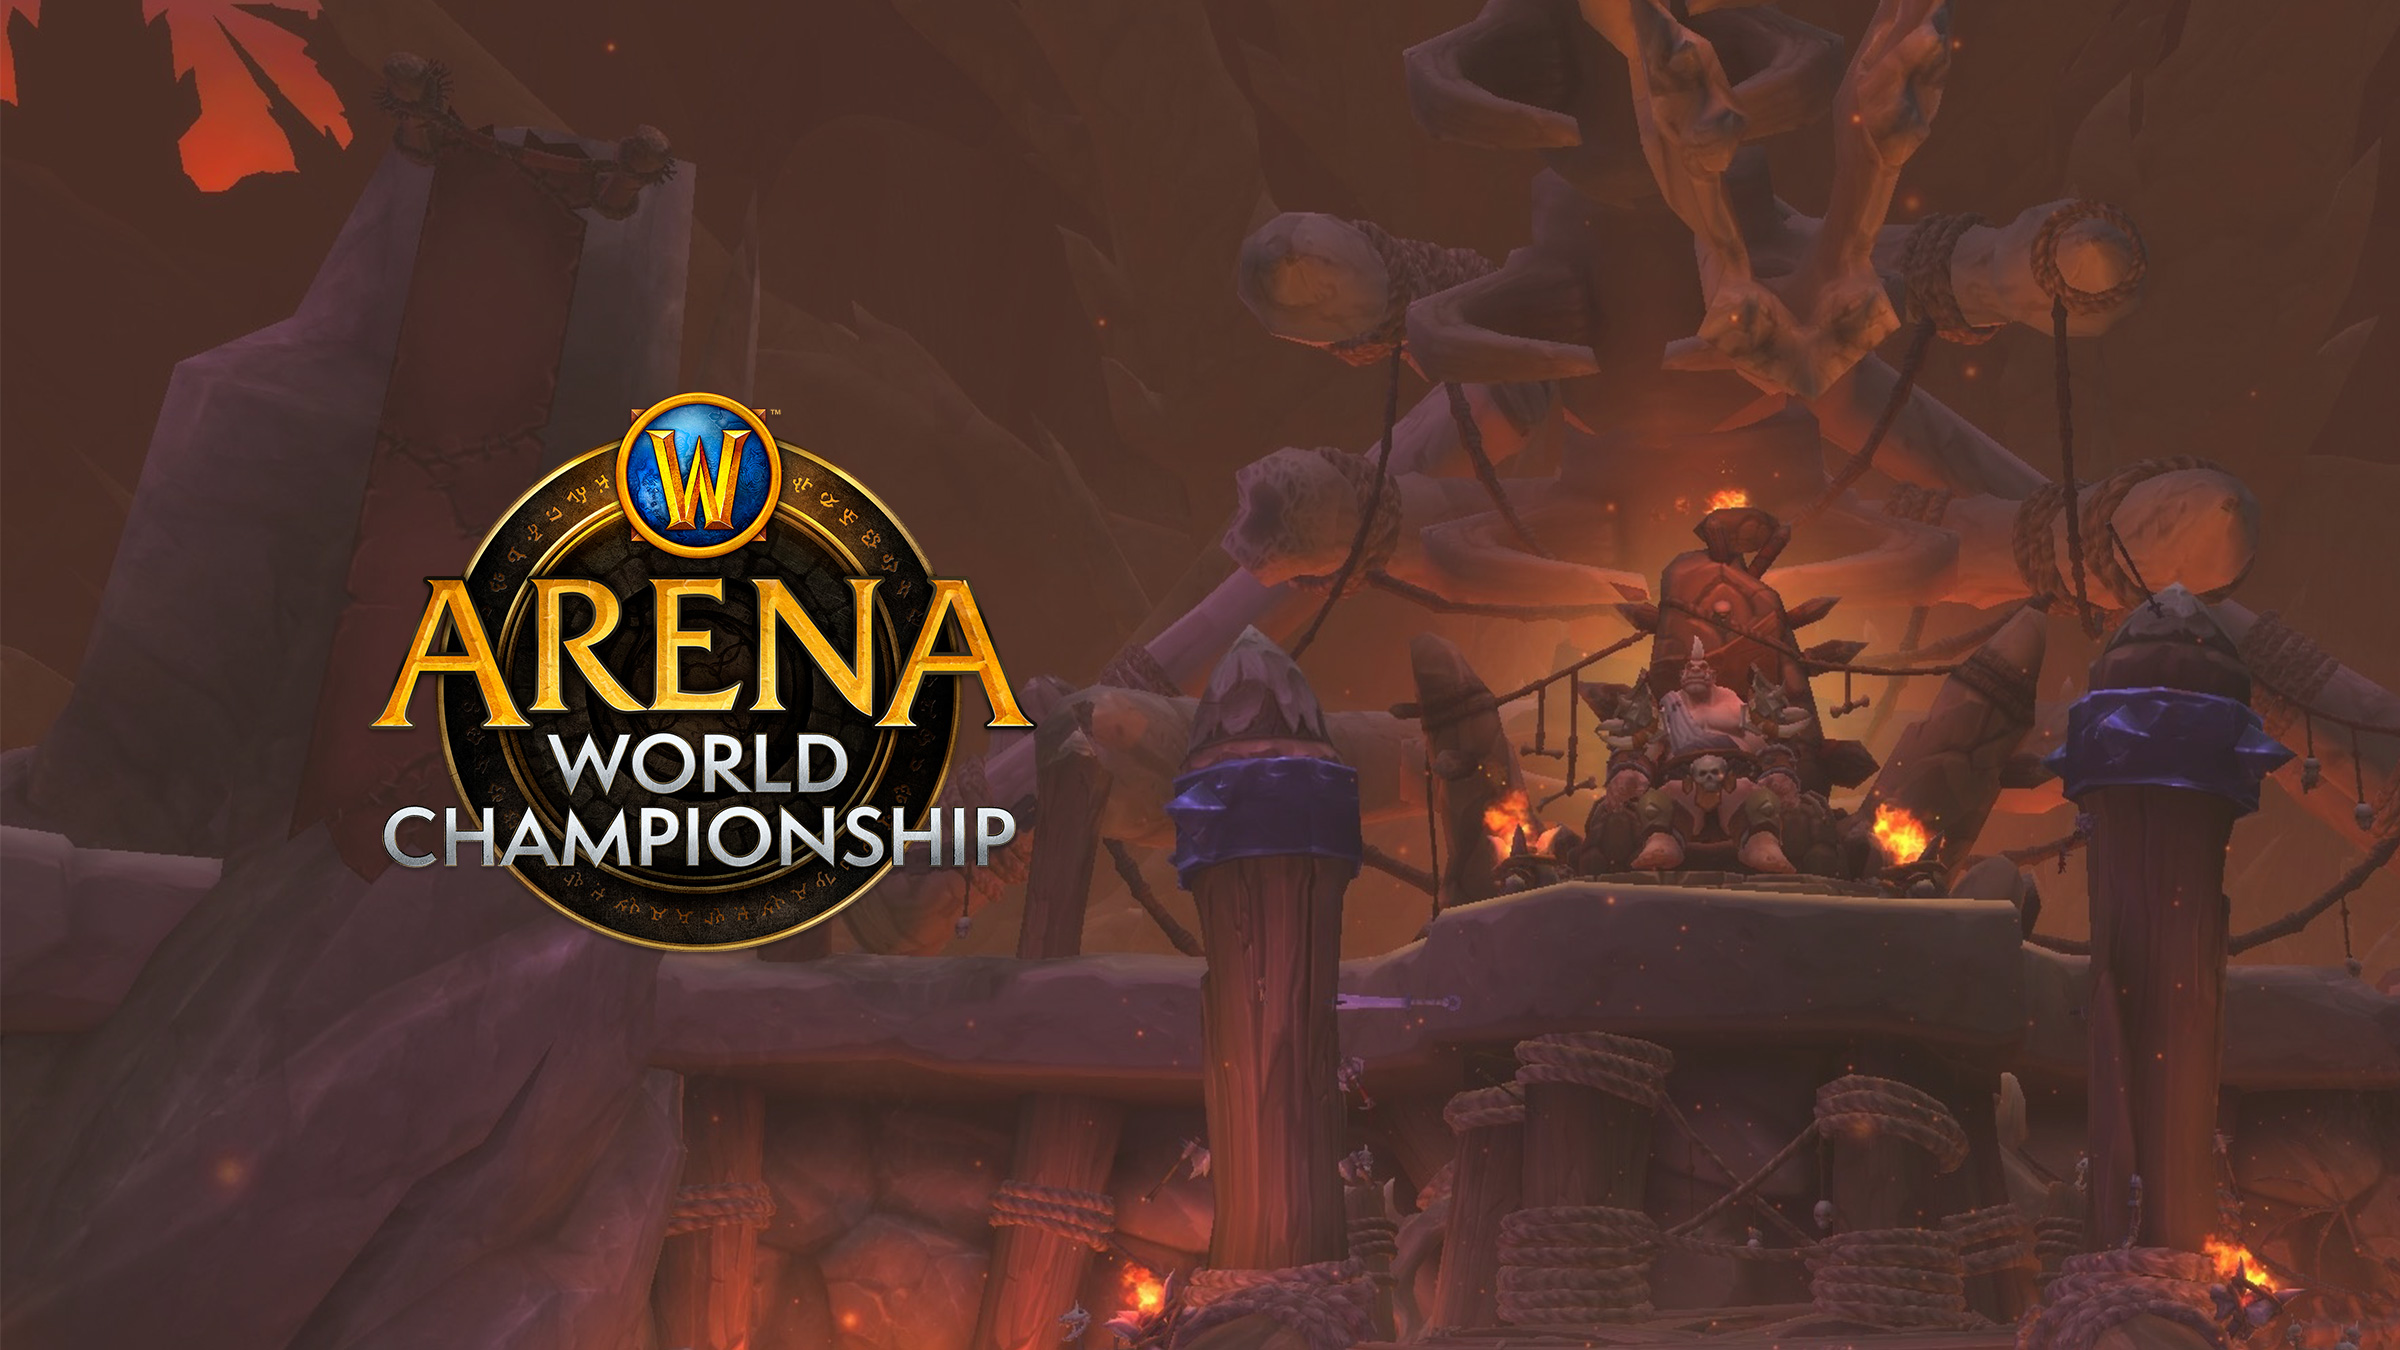 Meet the BlizzCon 2019 Arena World Championship Winners!